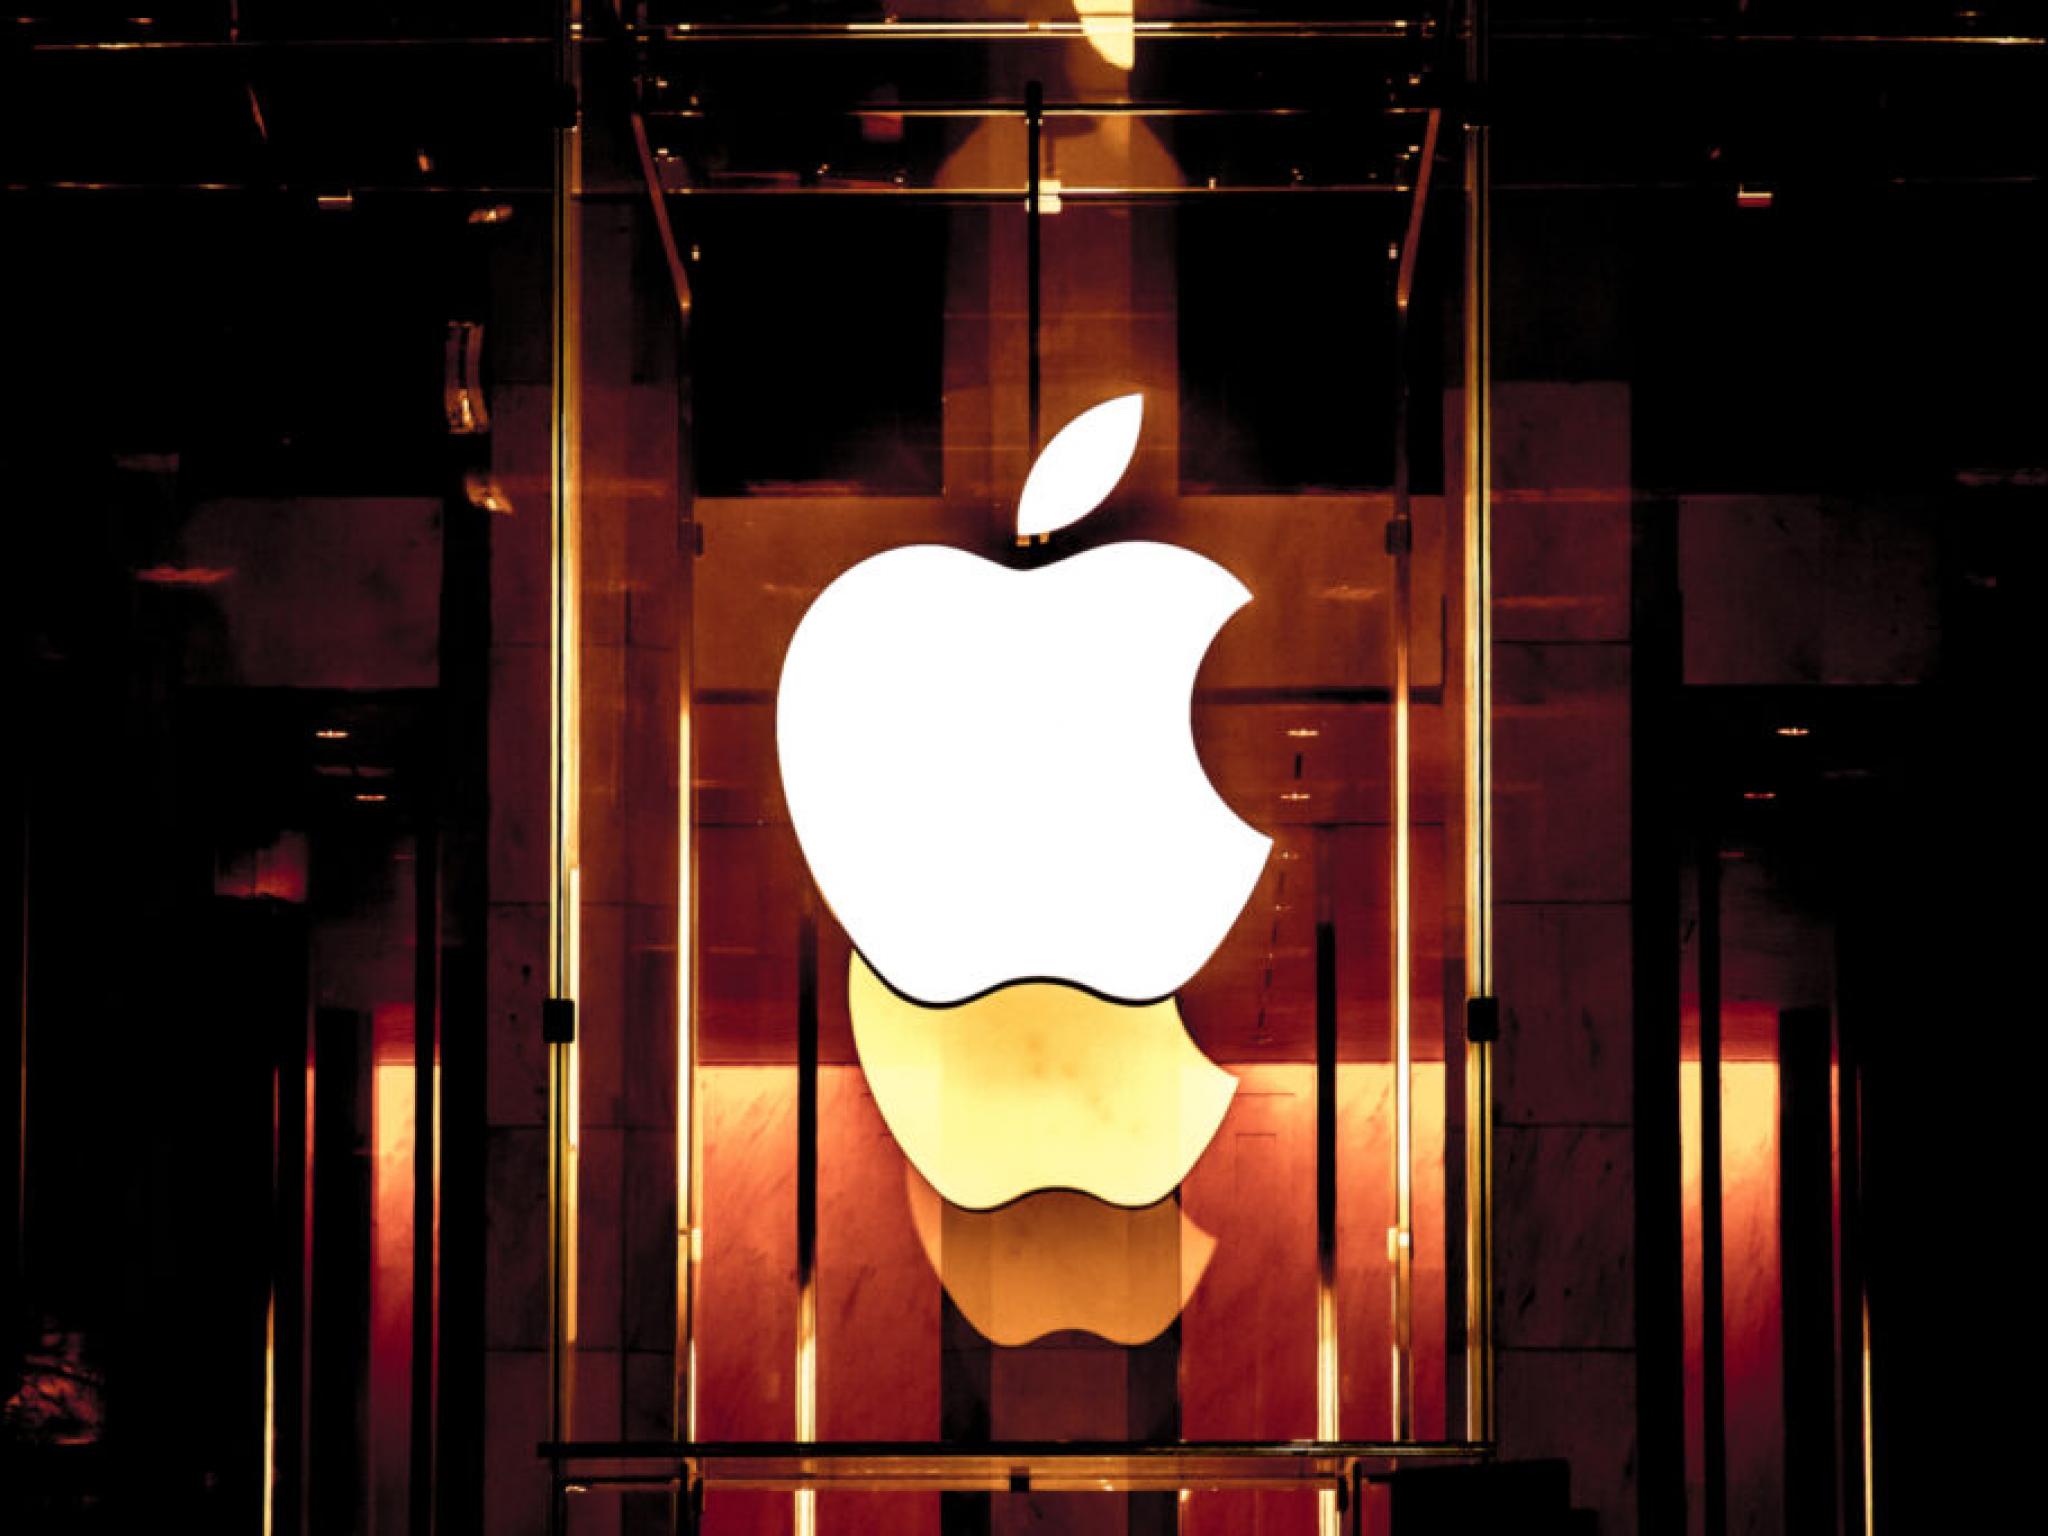  apple-to-rally-around-29-here-are-10-top-analyst-forecasts-for-thursday 